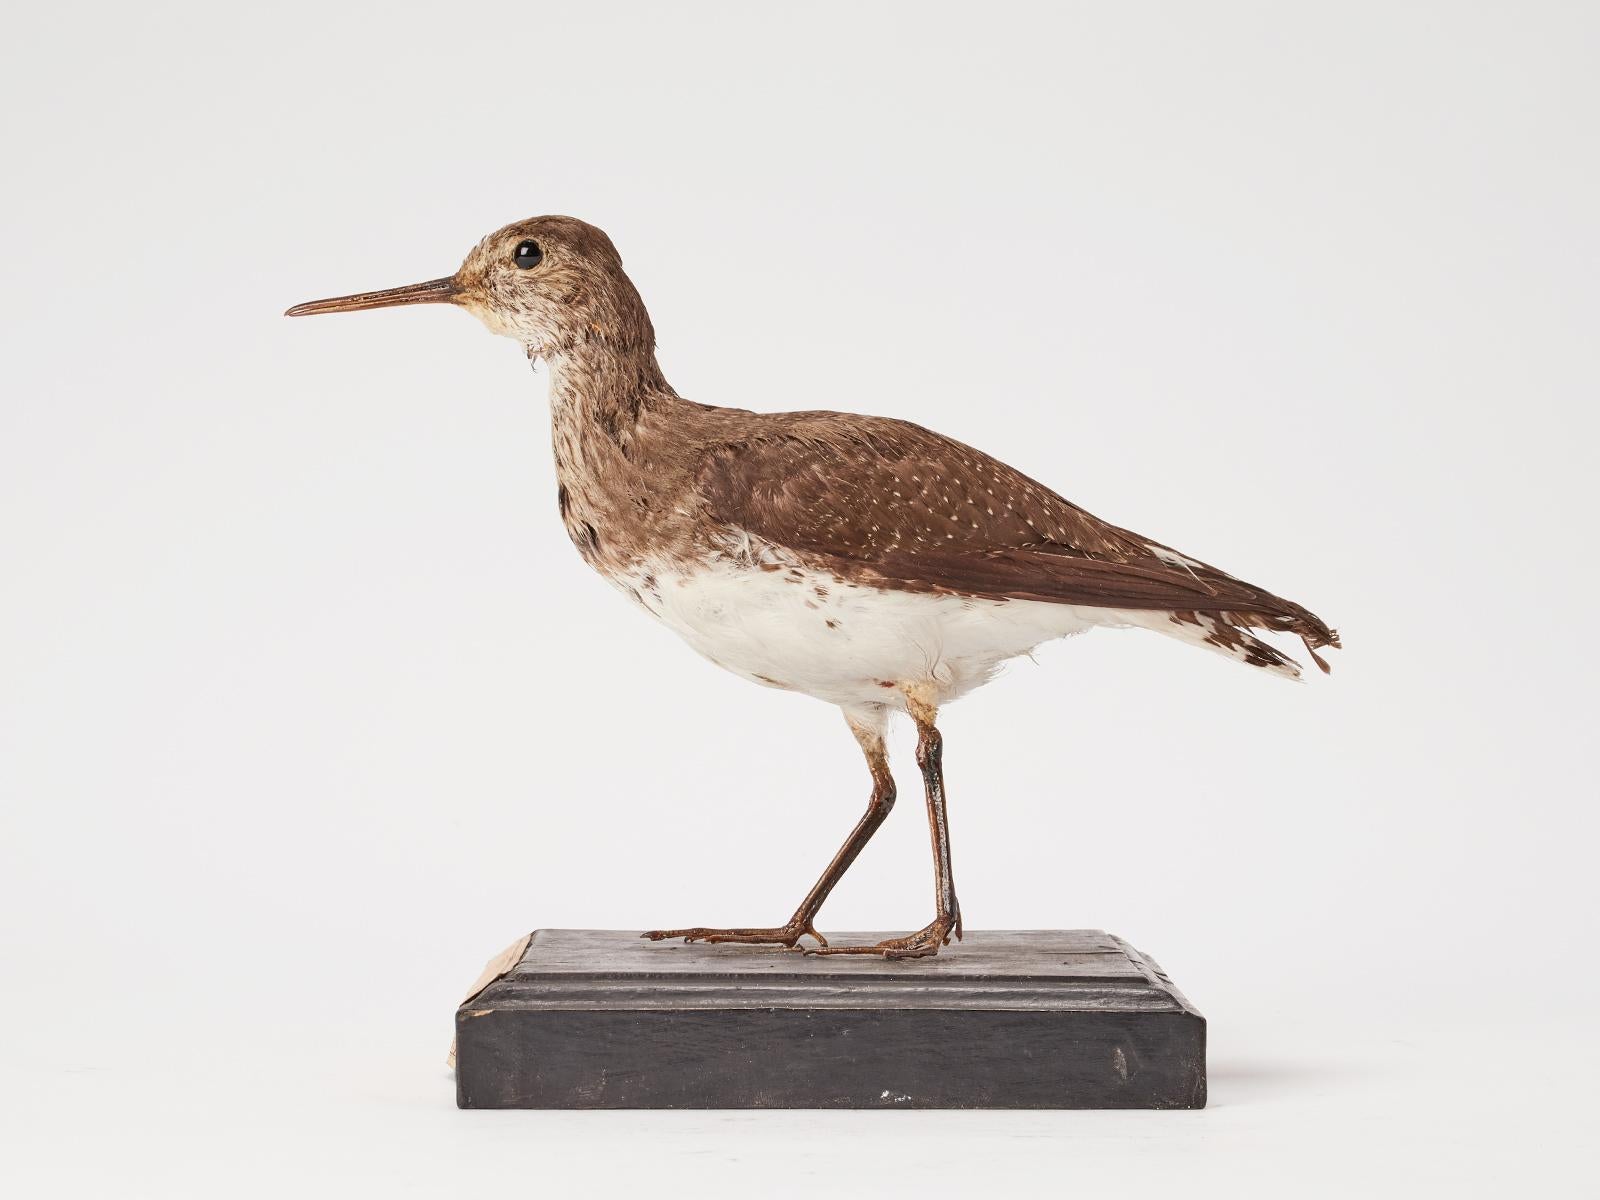 Natural specimen from Wunderkammer Stuffed bird Green Sandpiper (Tringa Ochropus) mounted on a wooden base with cartouche Specimen for laboratory and Natural history cabinet. S. Brogi Naturalista. Siena, Italy circa 1880.